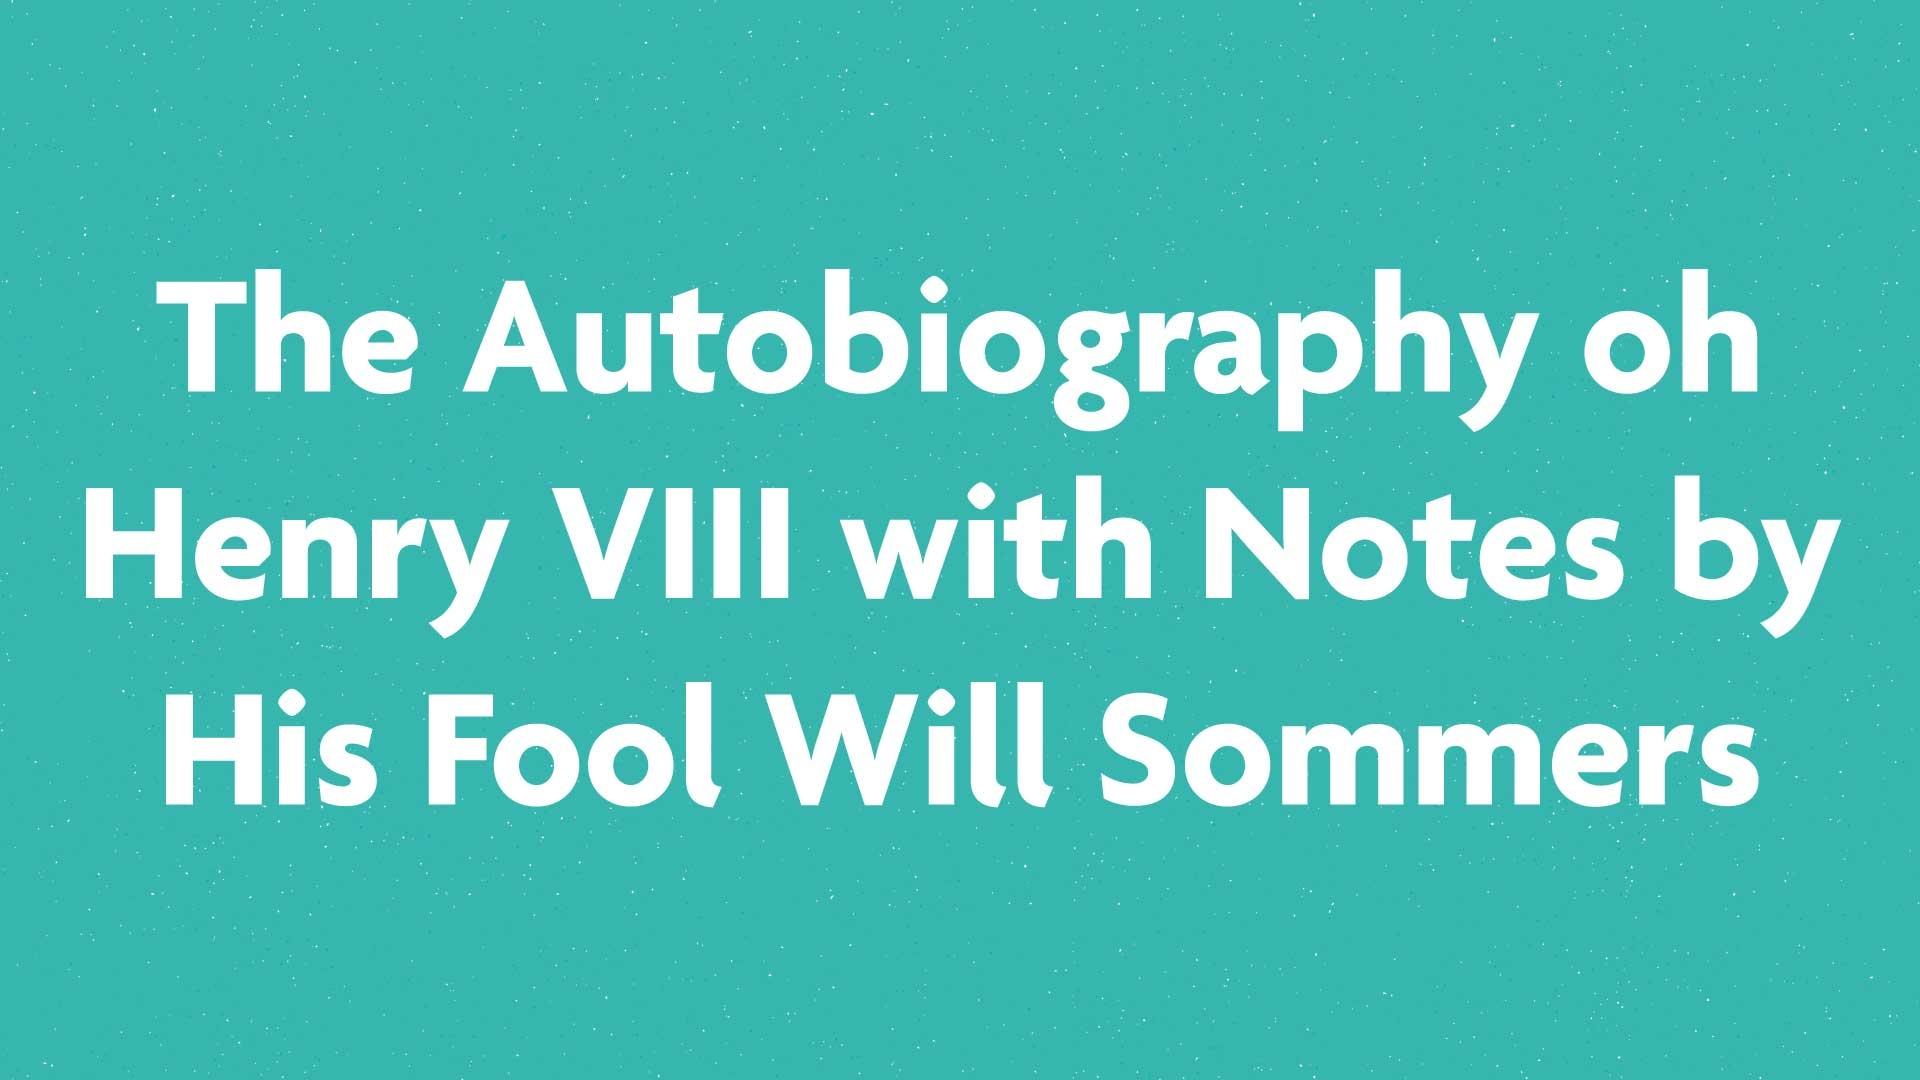 The Autobiography oh Henry VIII with Notes by His Fool Will Sommers book submission card on a green background.